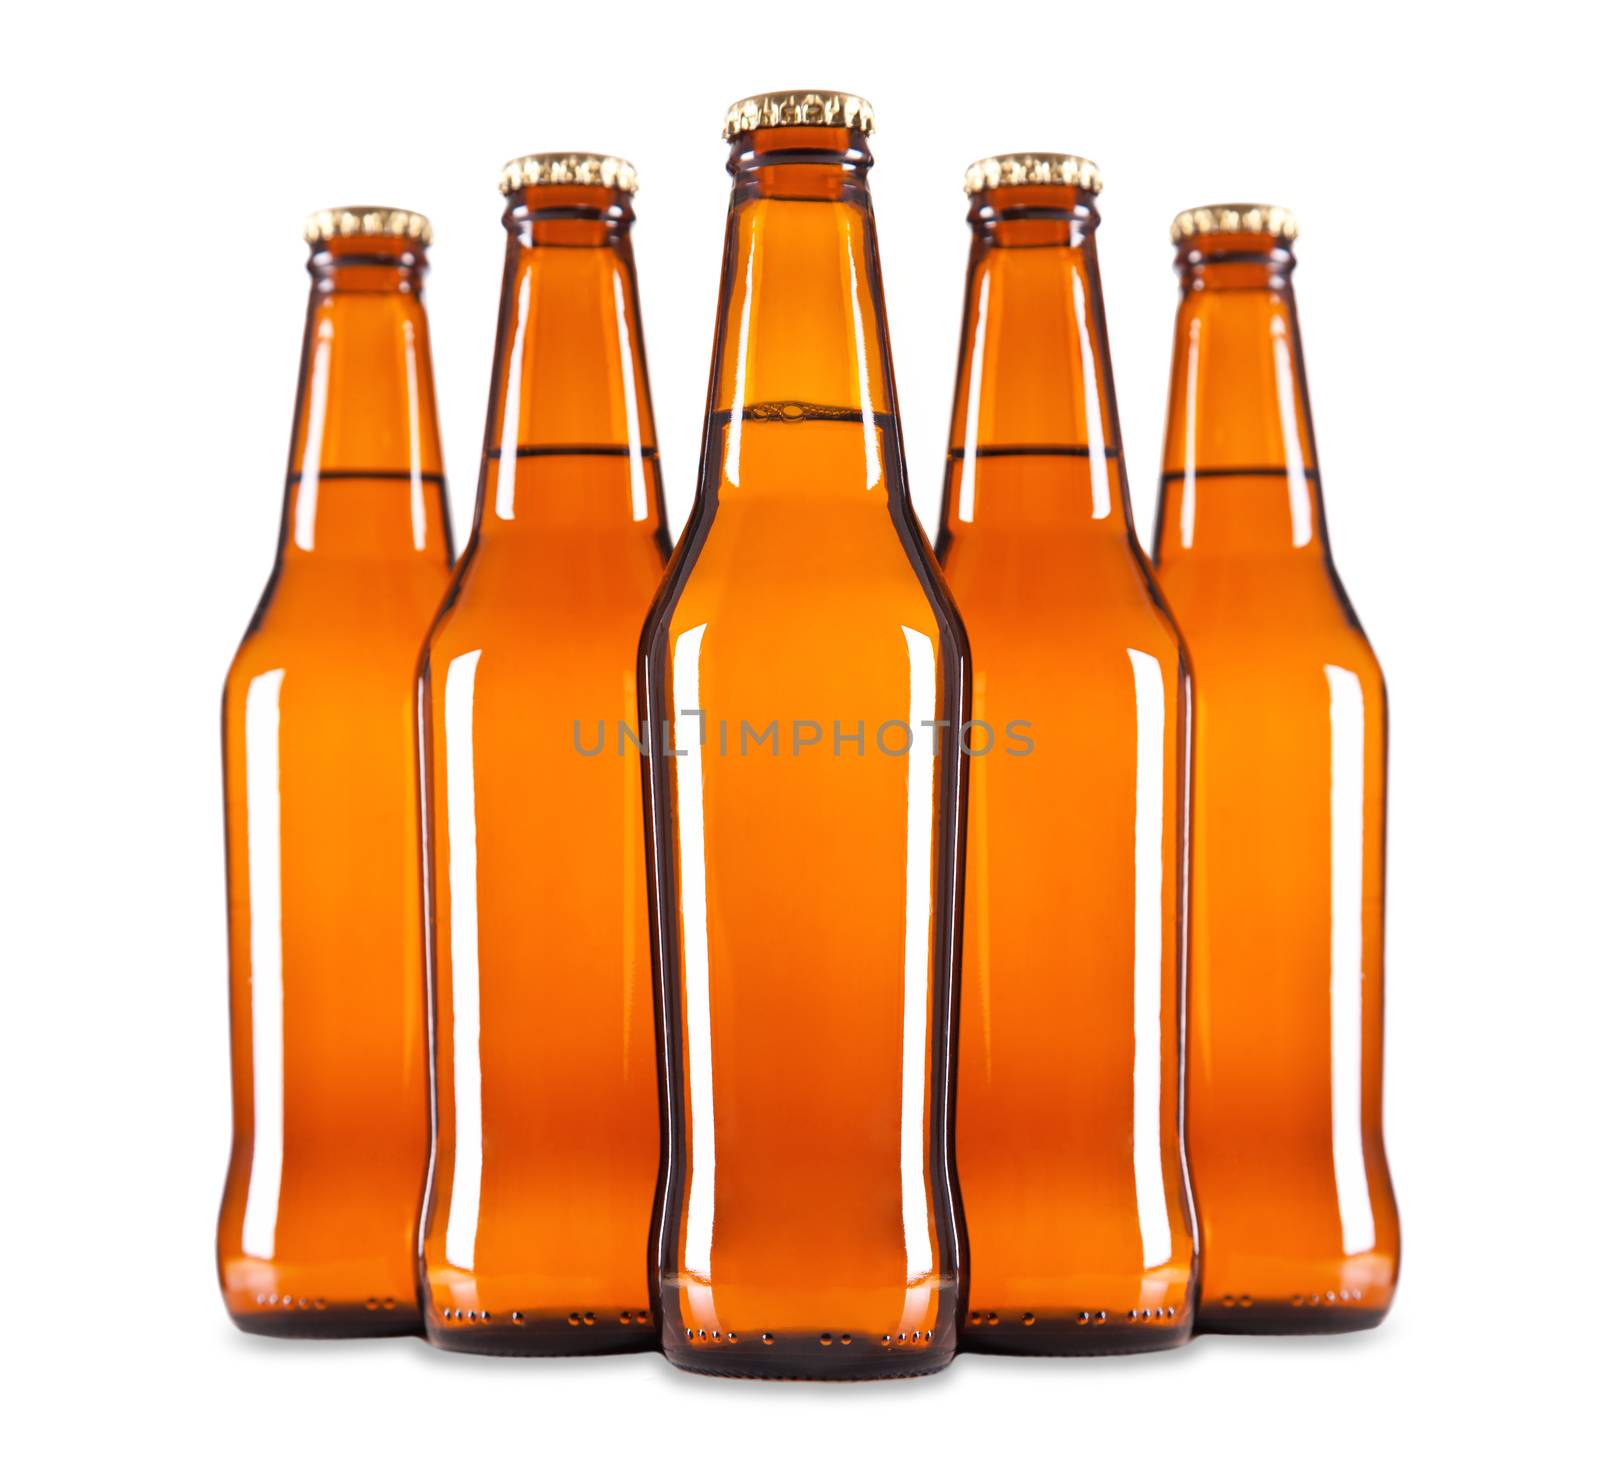 A group of five beer bottles in a diamond formation.